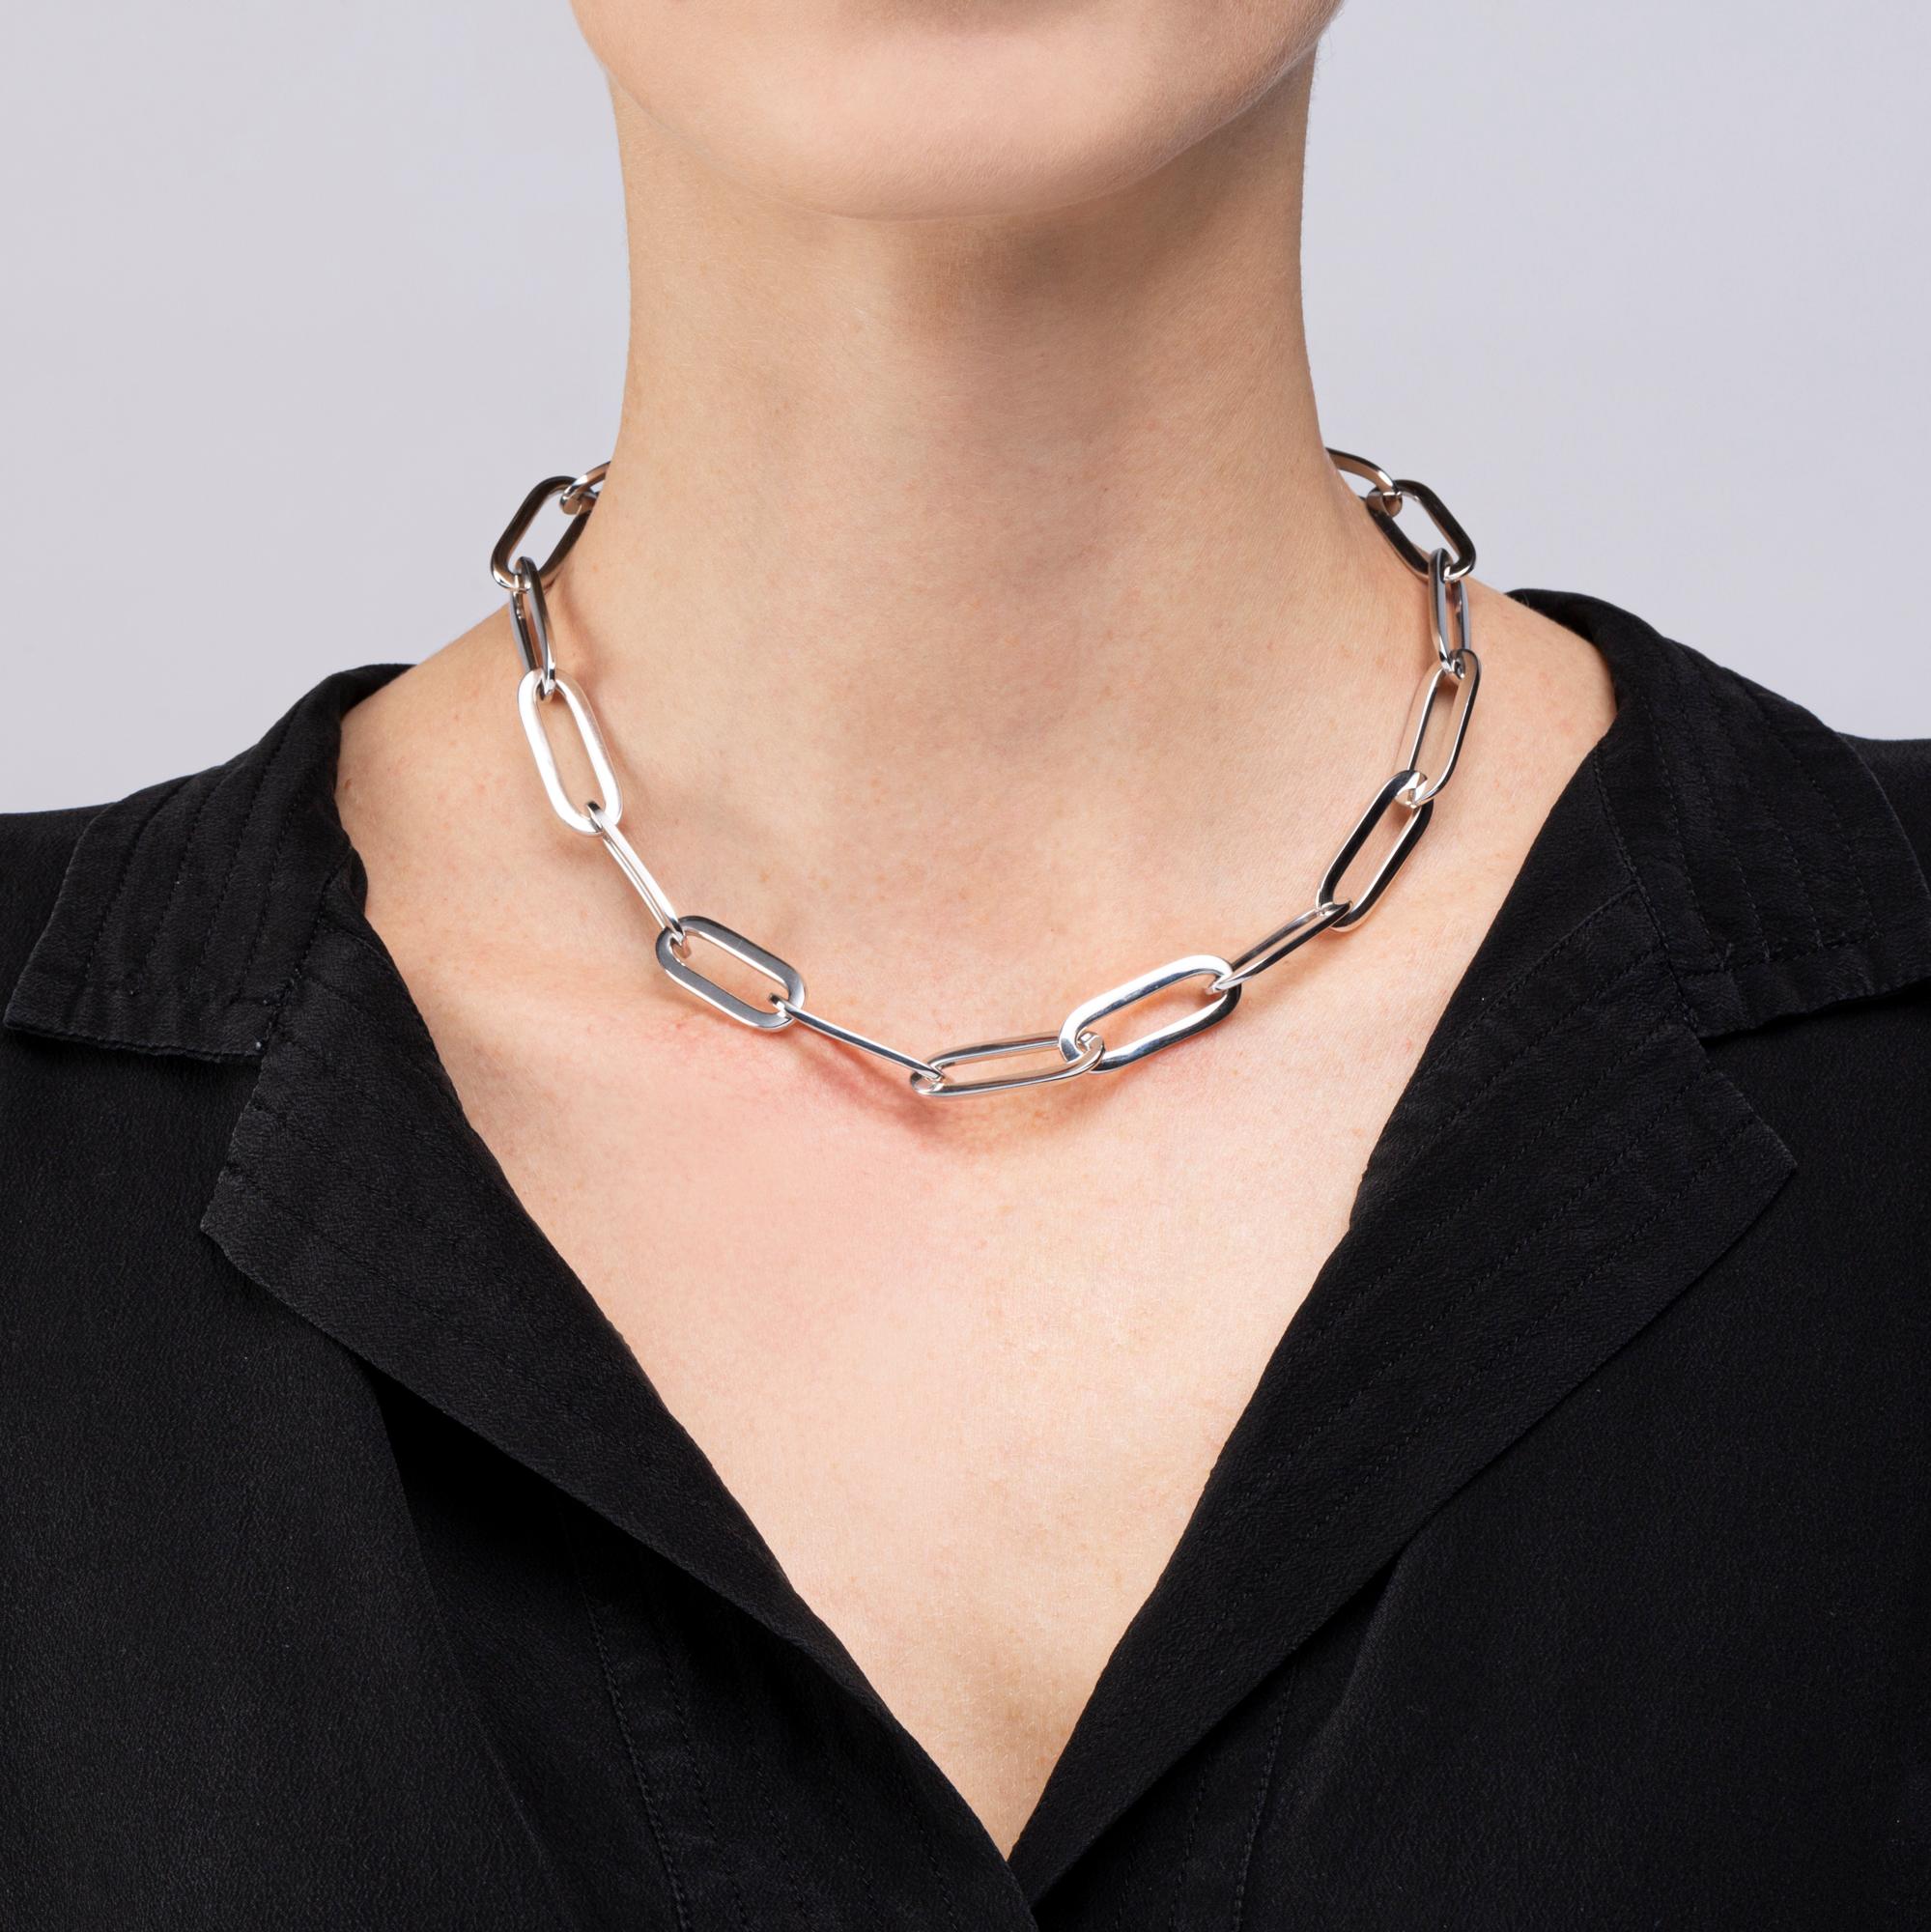 Alex Jona Design Collection, Hand crafted in Italy, 18 karat white gold 17.3 inch long link chain necklace.

Alex Jona jewels stand out, not only for their special design and for the excellent quality of the gemstones, but also for the careful